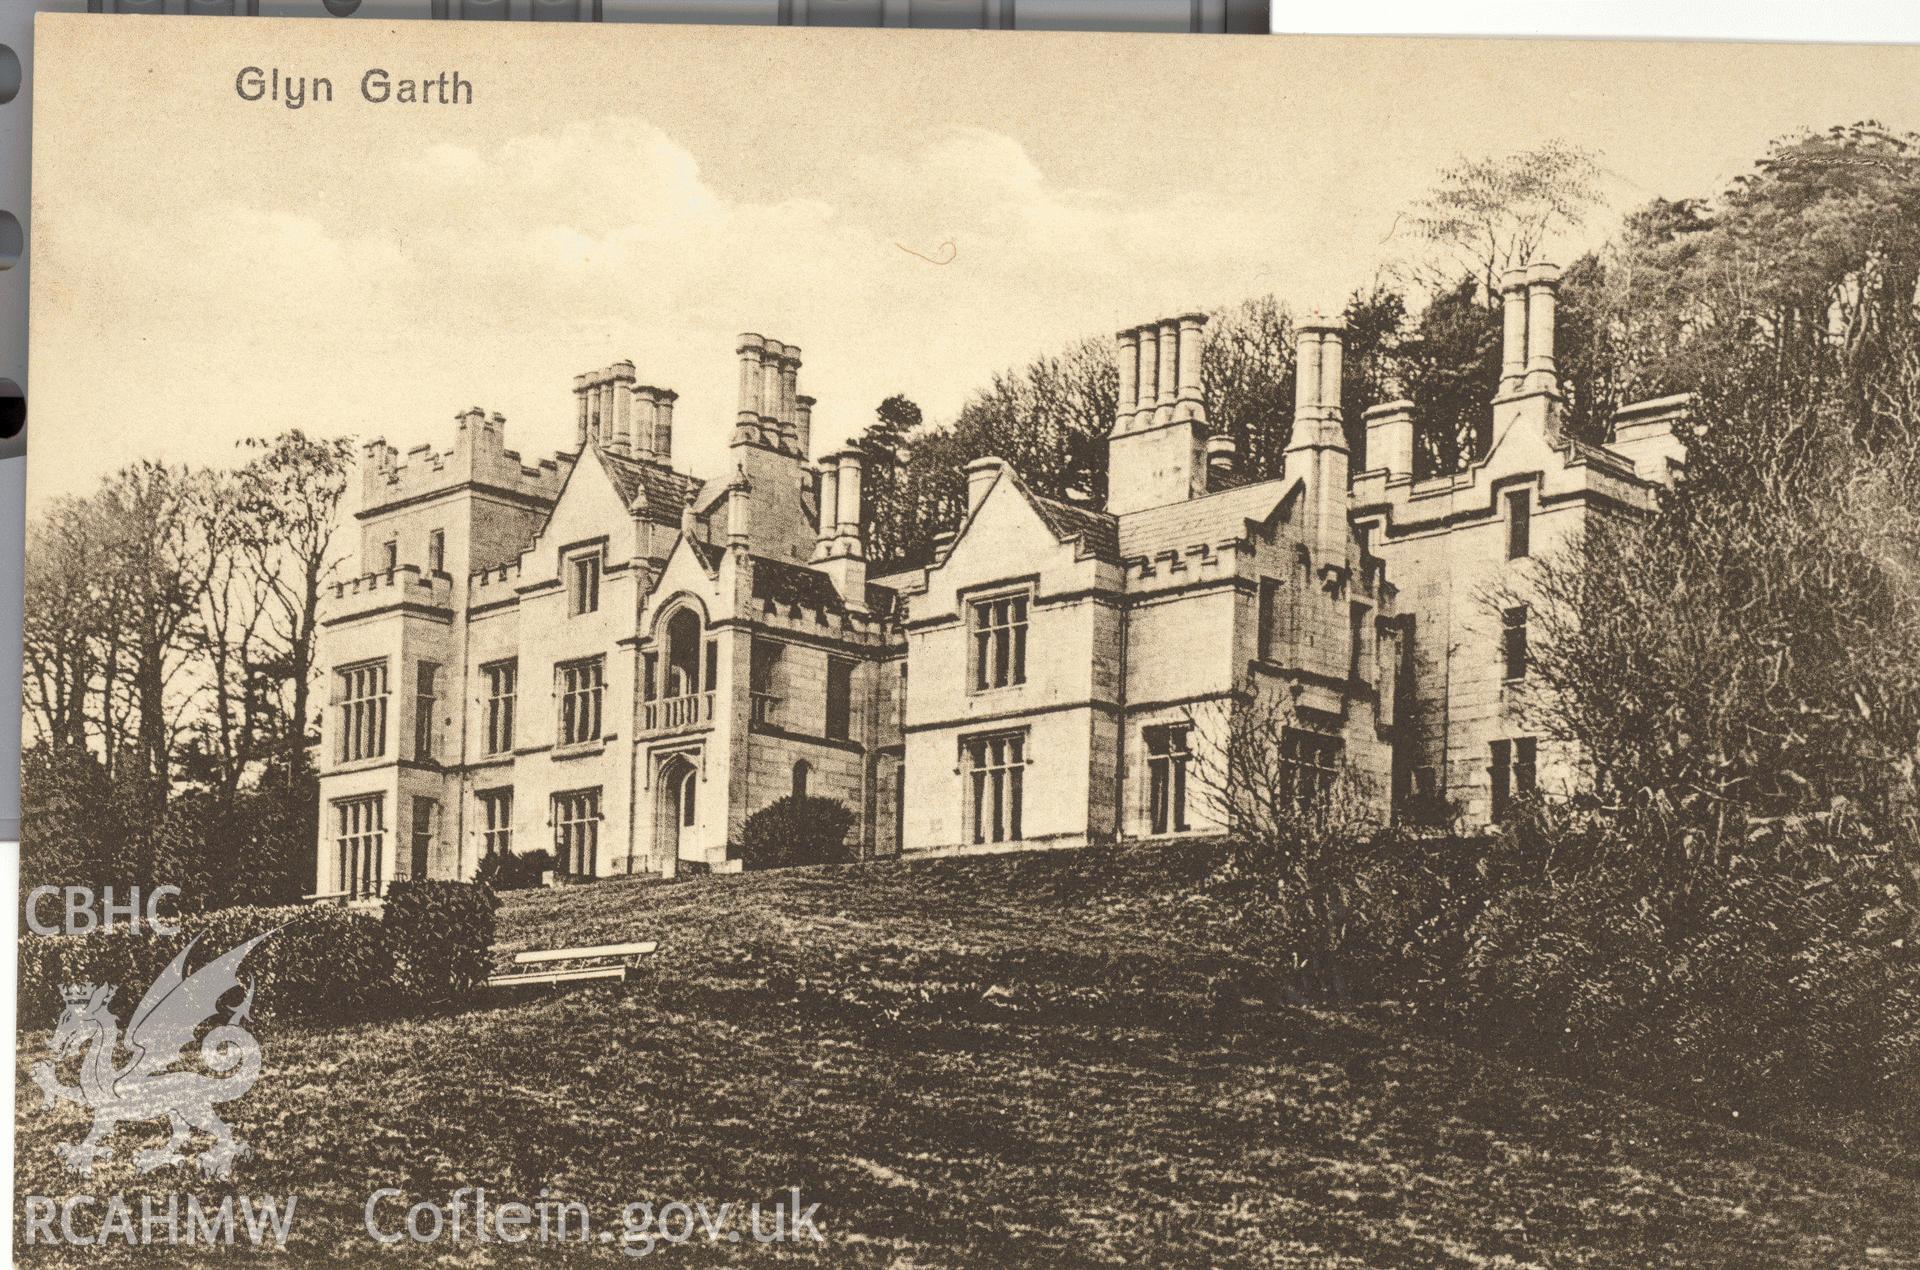 Digitised postcard image of Glyn Garth, Cwm Cadnant. Produced by Parks and Gardens Data Services, from an original item in the Peter Davis Collection at Parks and Gardens UK. We hold only web-resolution images of this collection, suitable for viewing on screen and for research purposes only. We do not hold the original images, or publication quality scans.